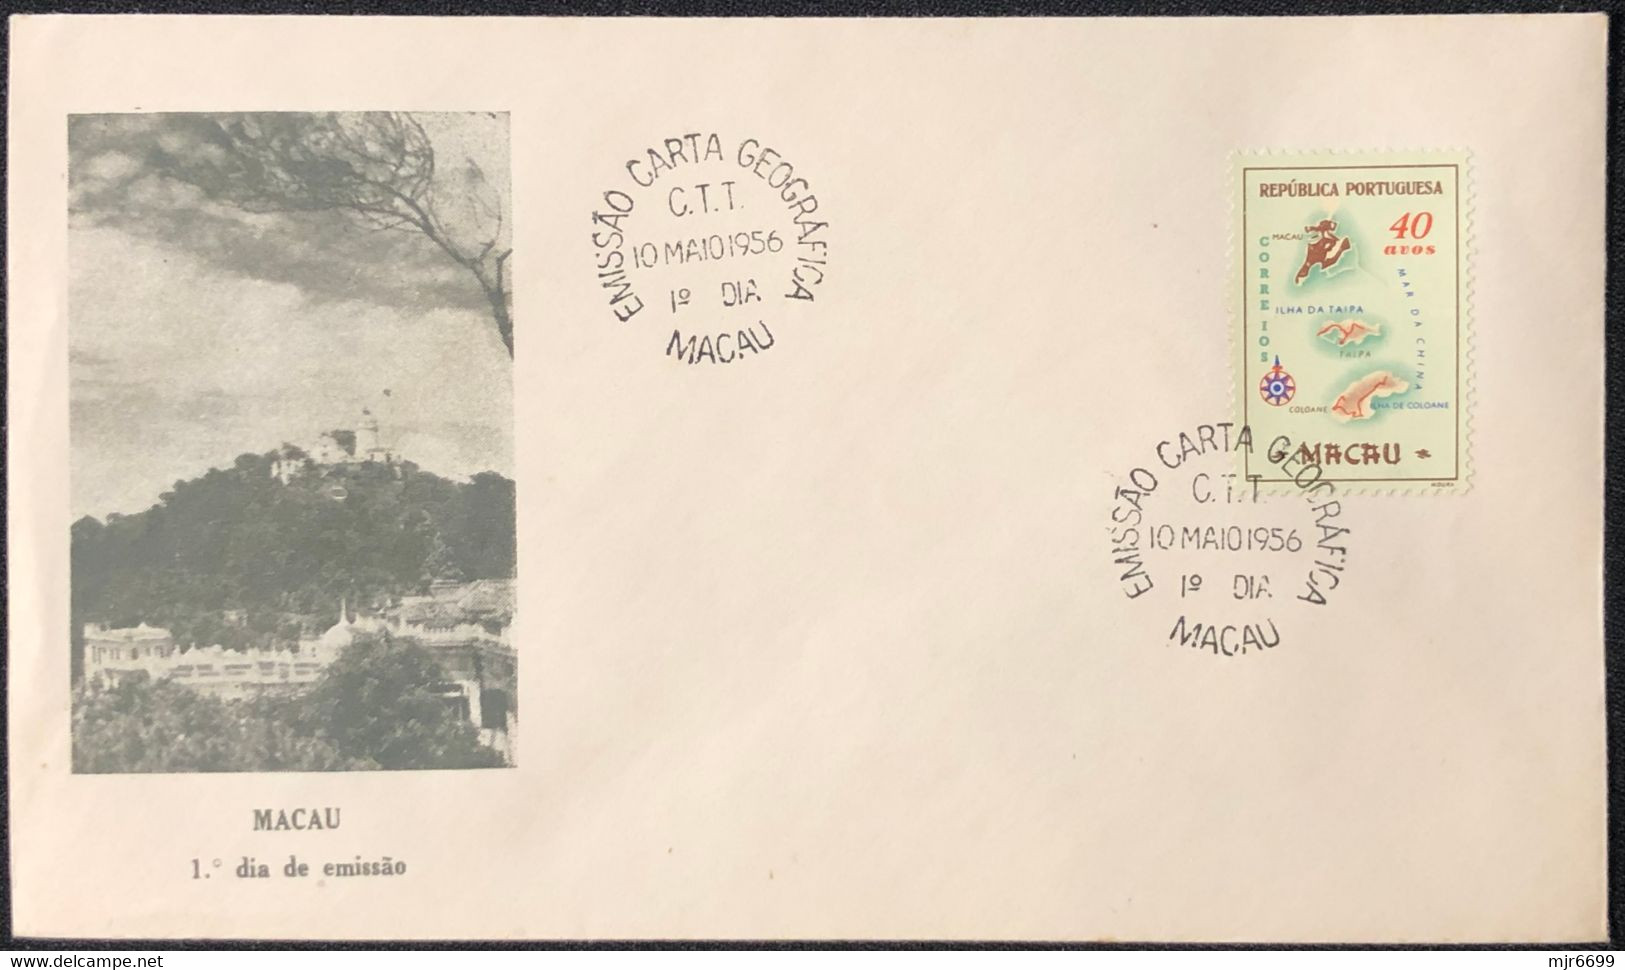 1956 GEOGRAPHIC CHART OF MACAU FDC X 4 COVERS ALL DIFFERENT - CAT. 85 EUROSOR COMPLETE SET. - Lettres & Documents